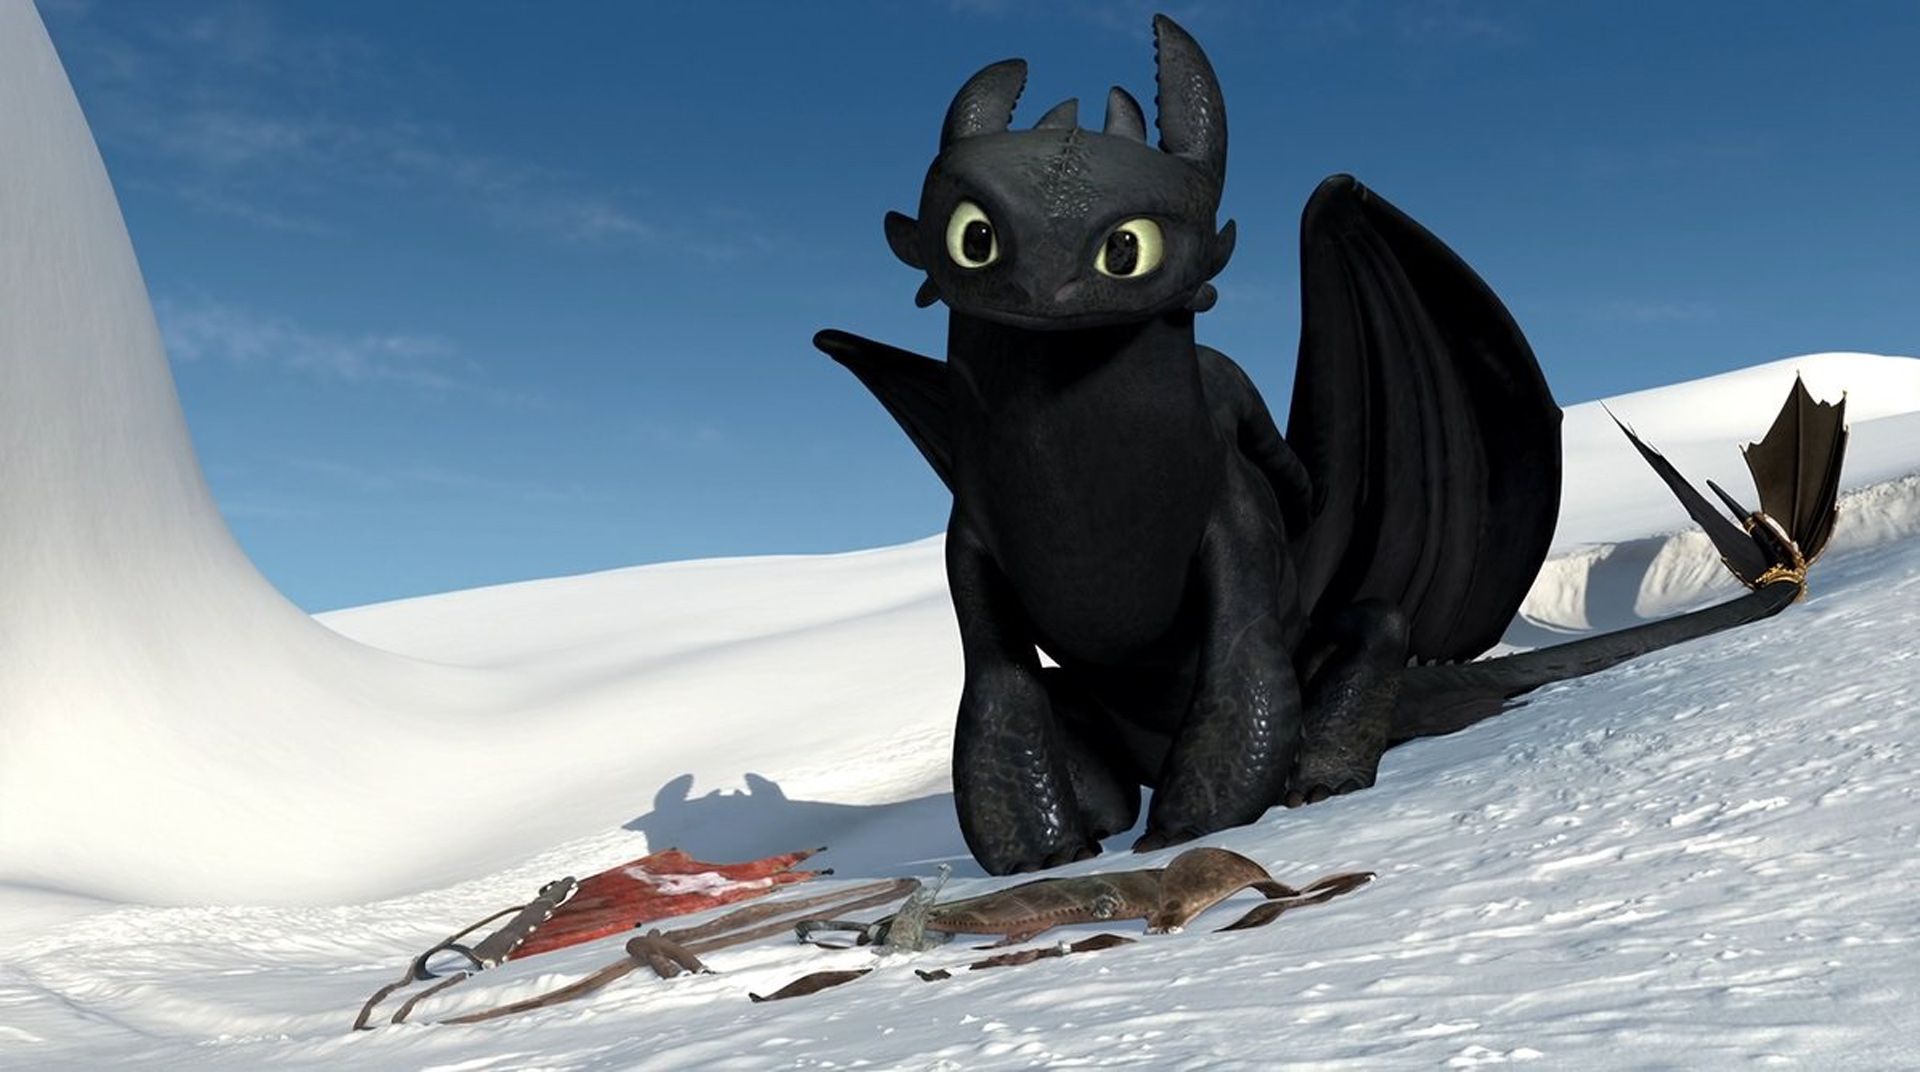 Toothless Wallpaper ideas. toothless wallpaper, toothless, how to train your dragon